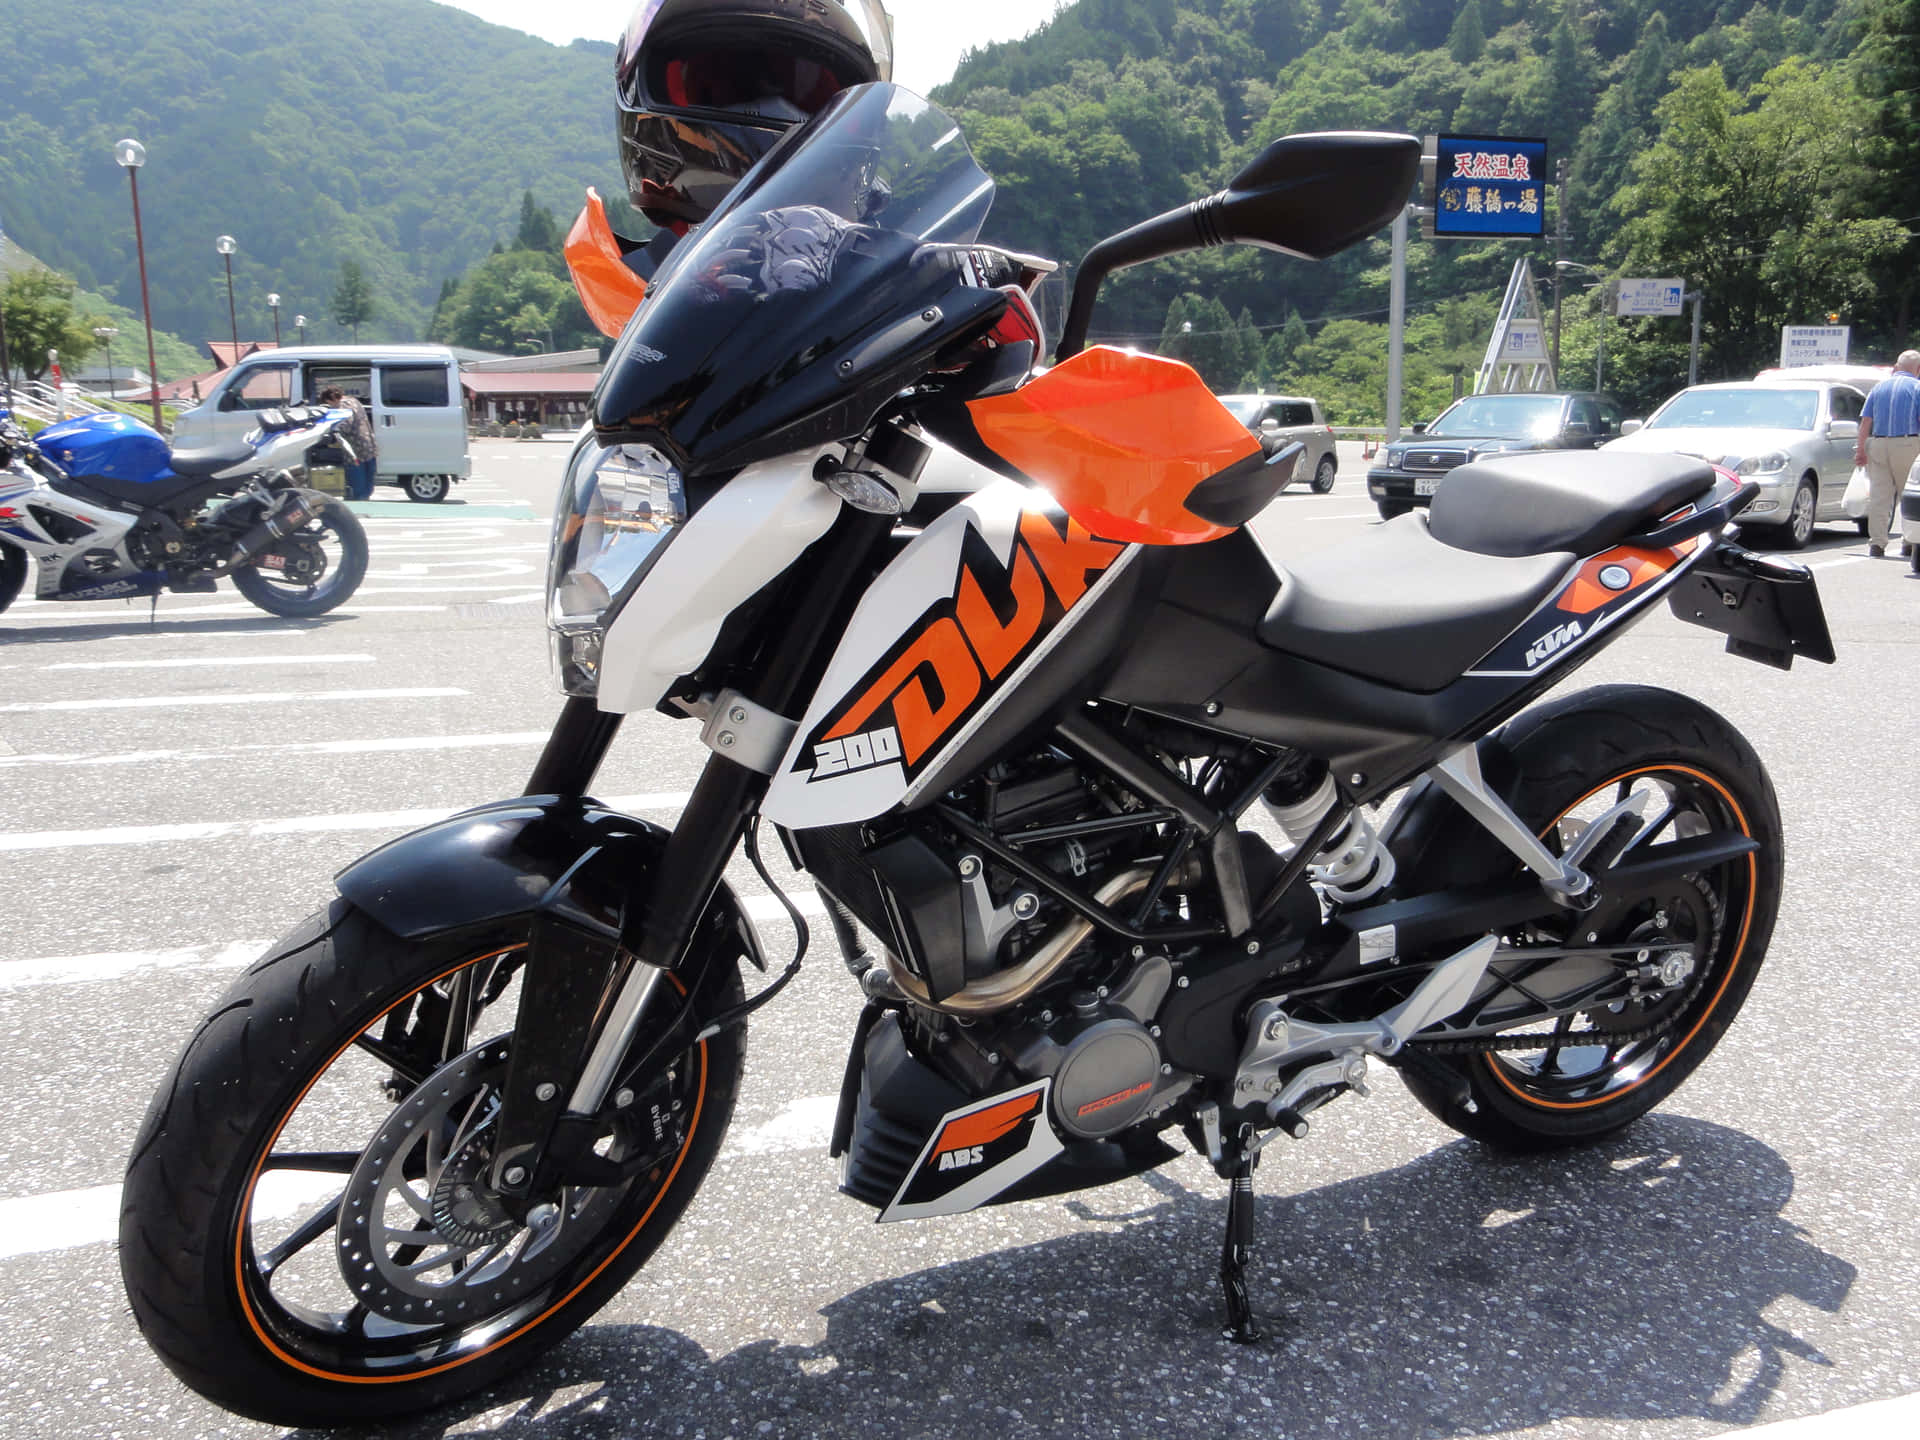 Ktm Duke 200 Motorcycle Parked In Parking Lot Picture